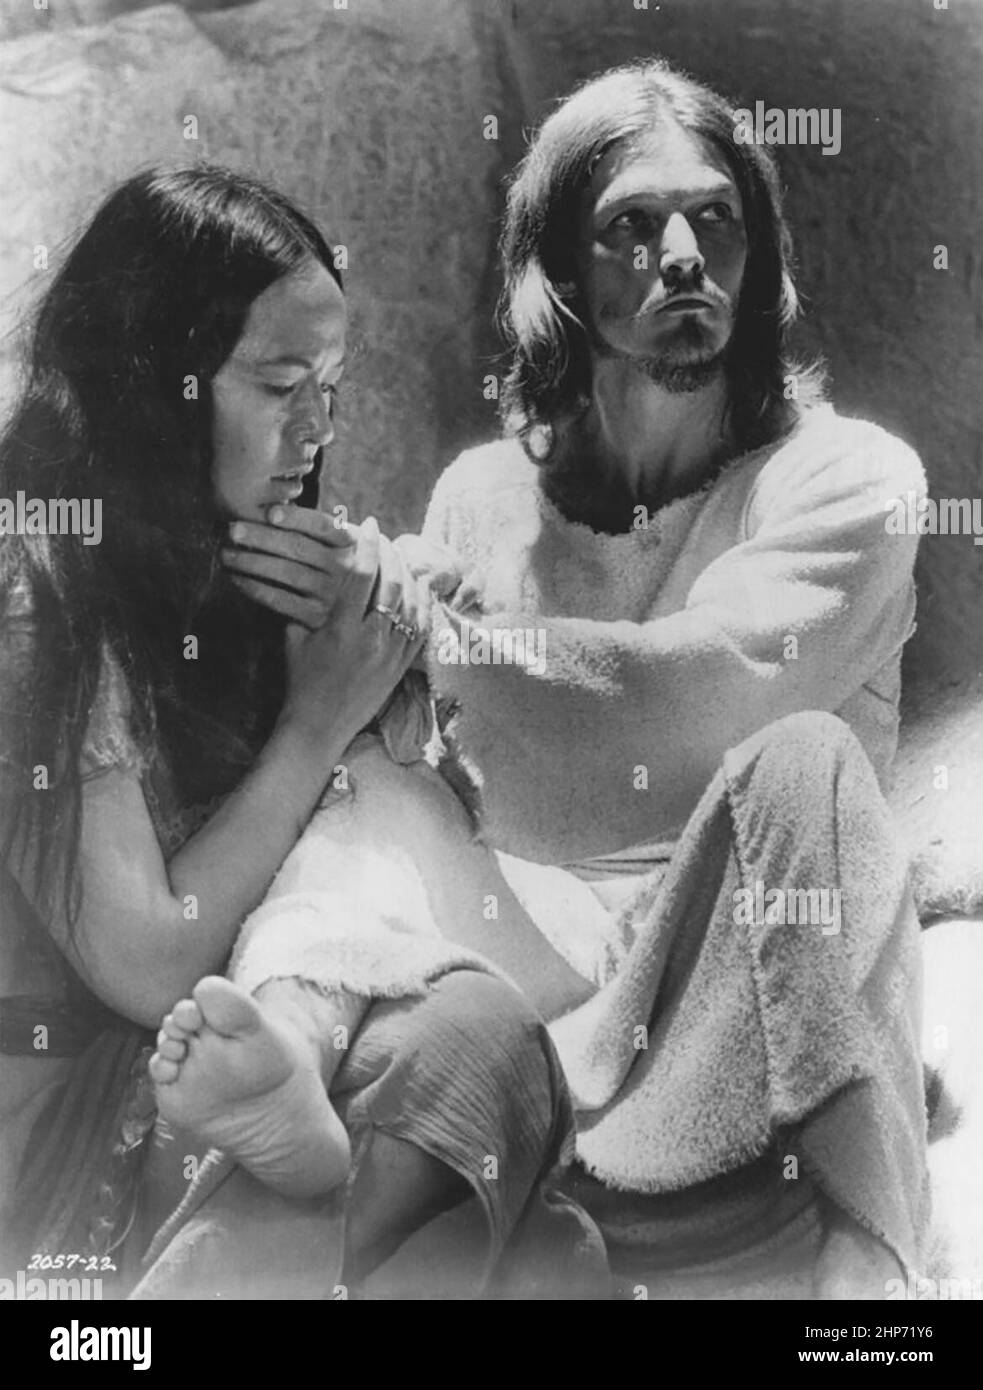 Publicity photo of American entertainers Yvonne Elliman and Ted Neeley promoting their roles in the 1973 feature film Jesus Christ Superstar Stock Photo